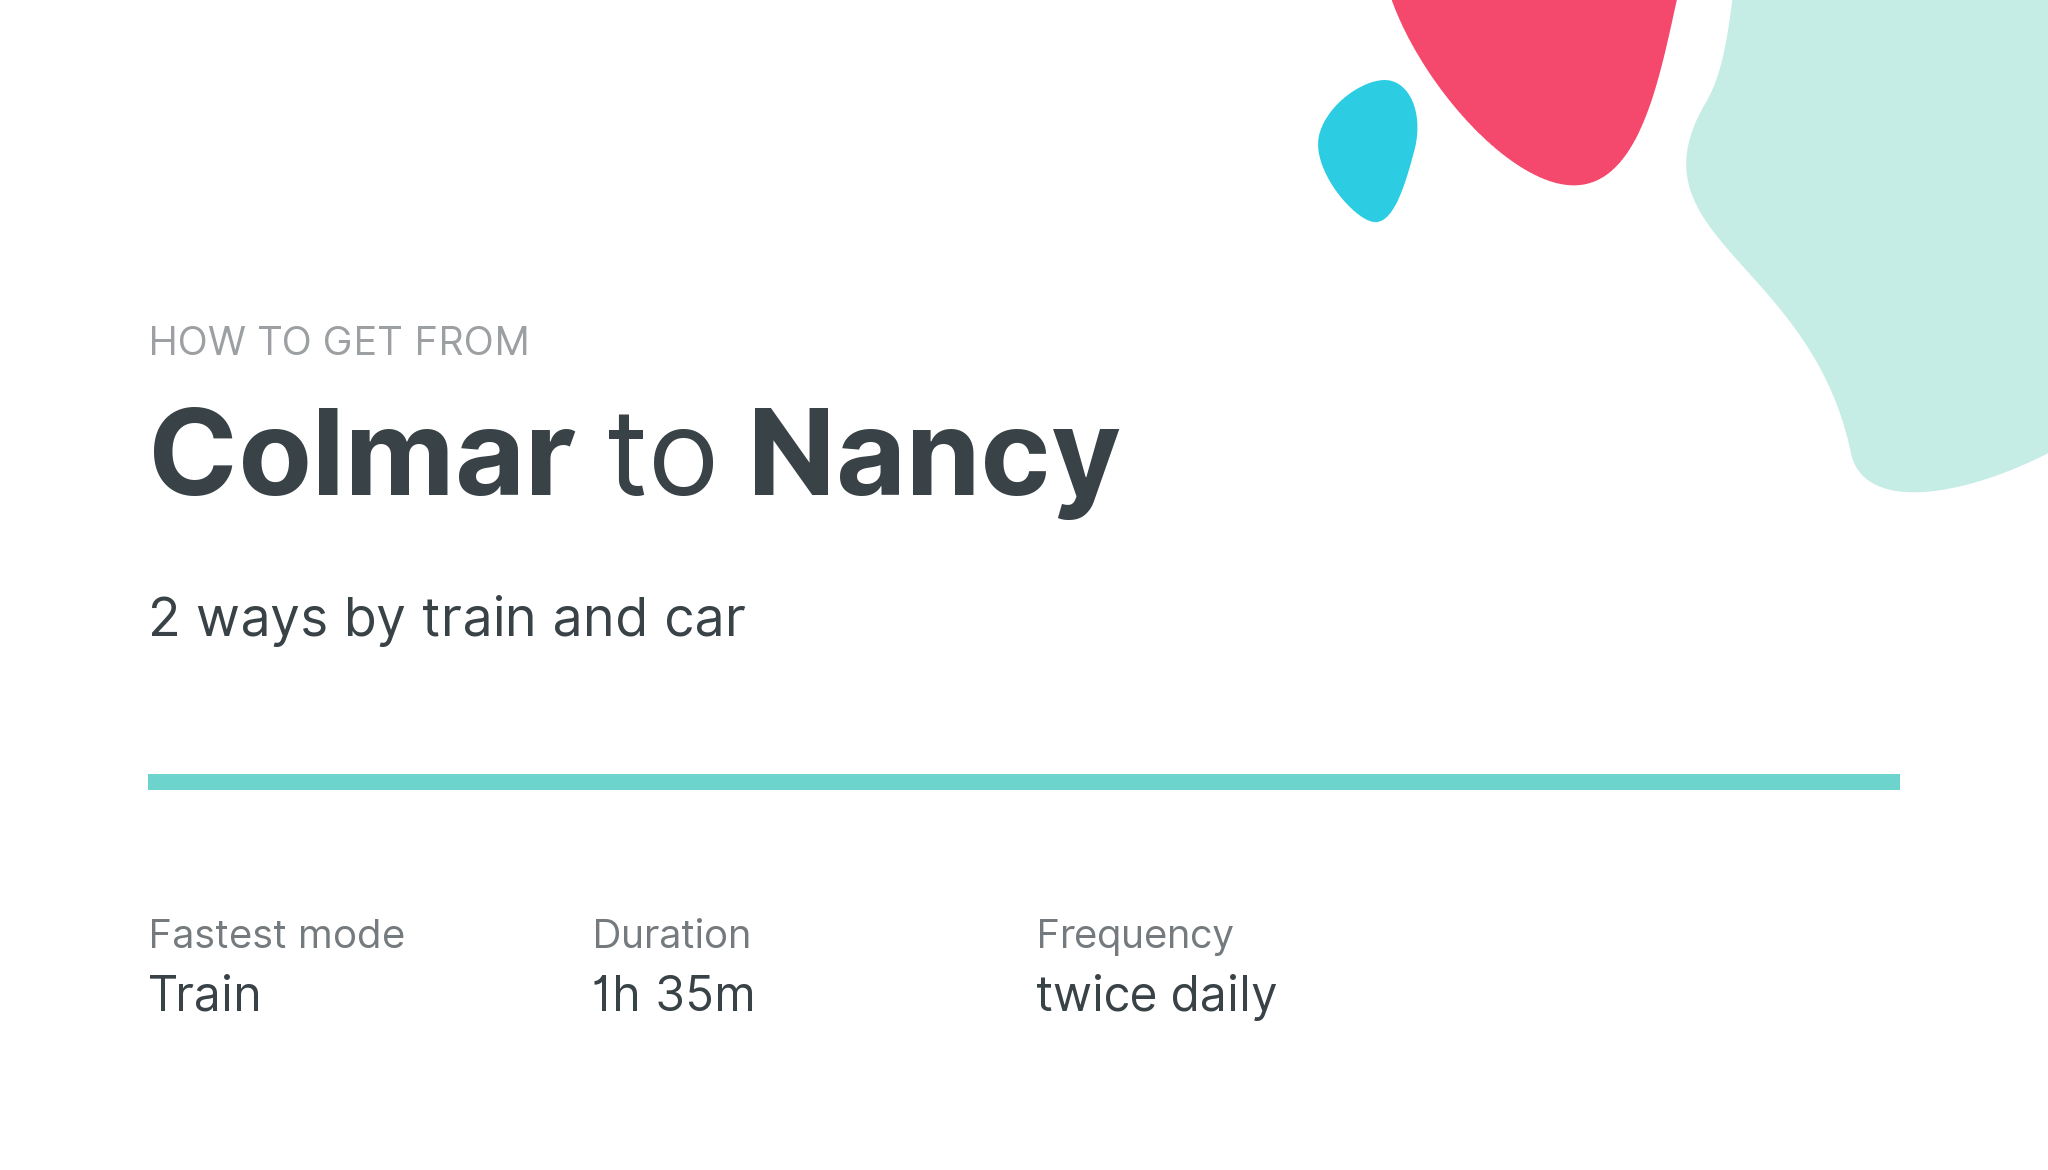 How do I get from Colmar to Nancy